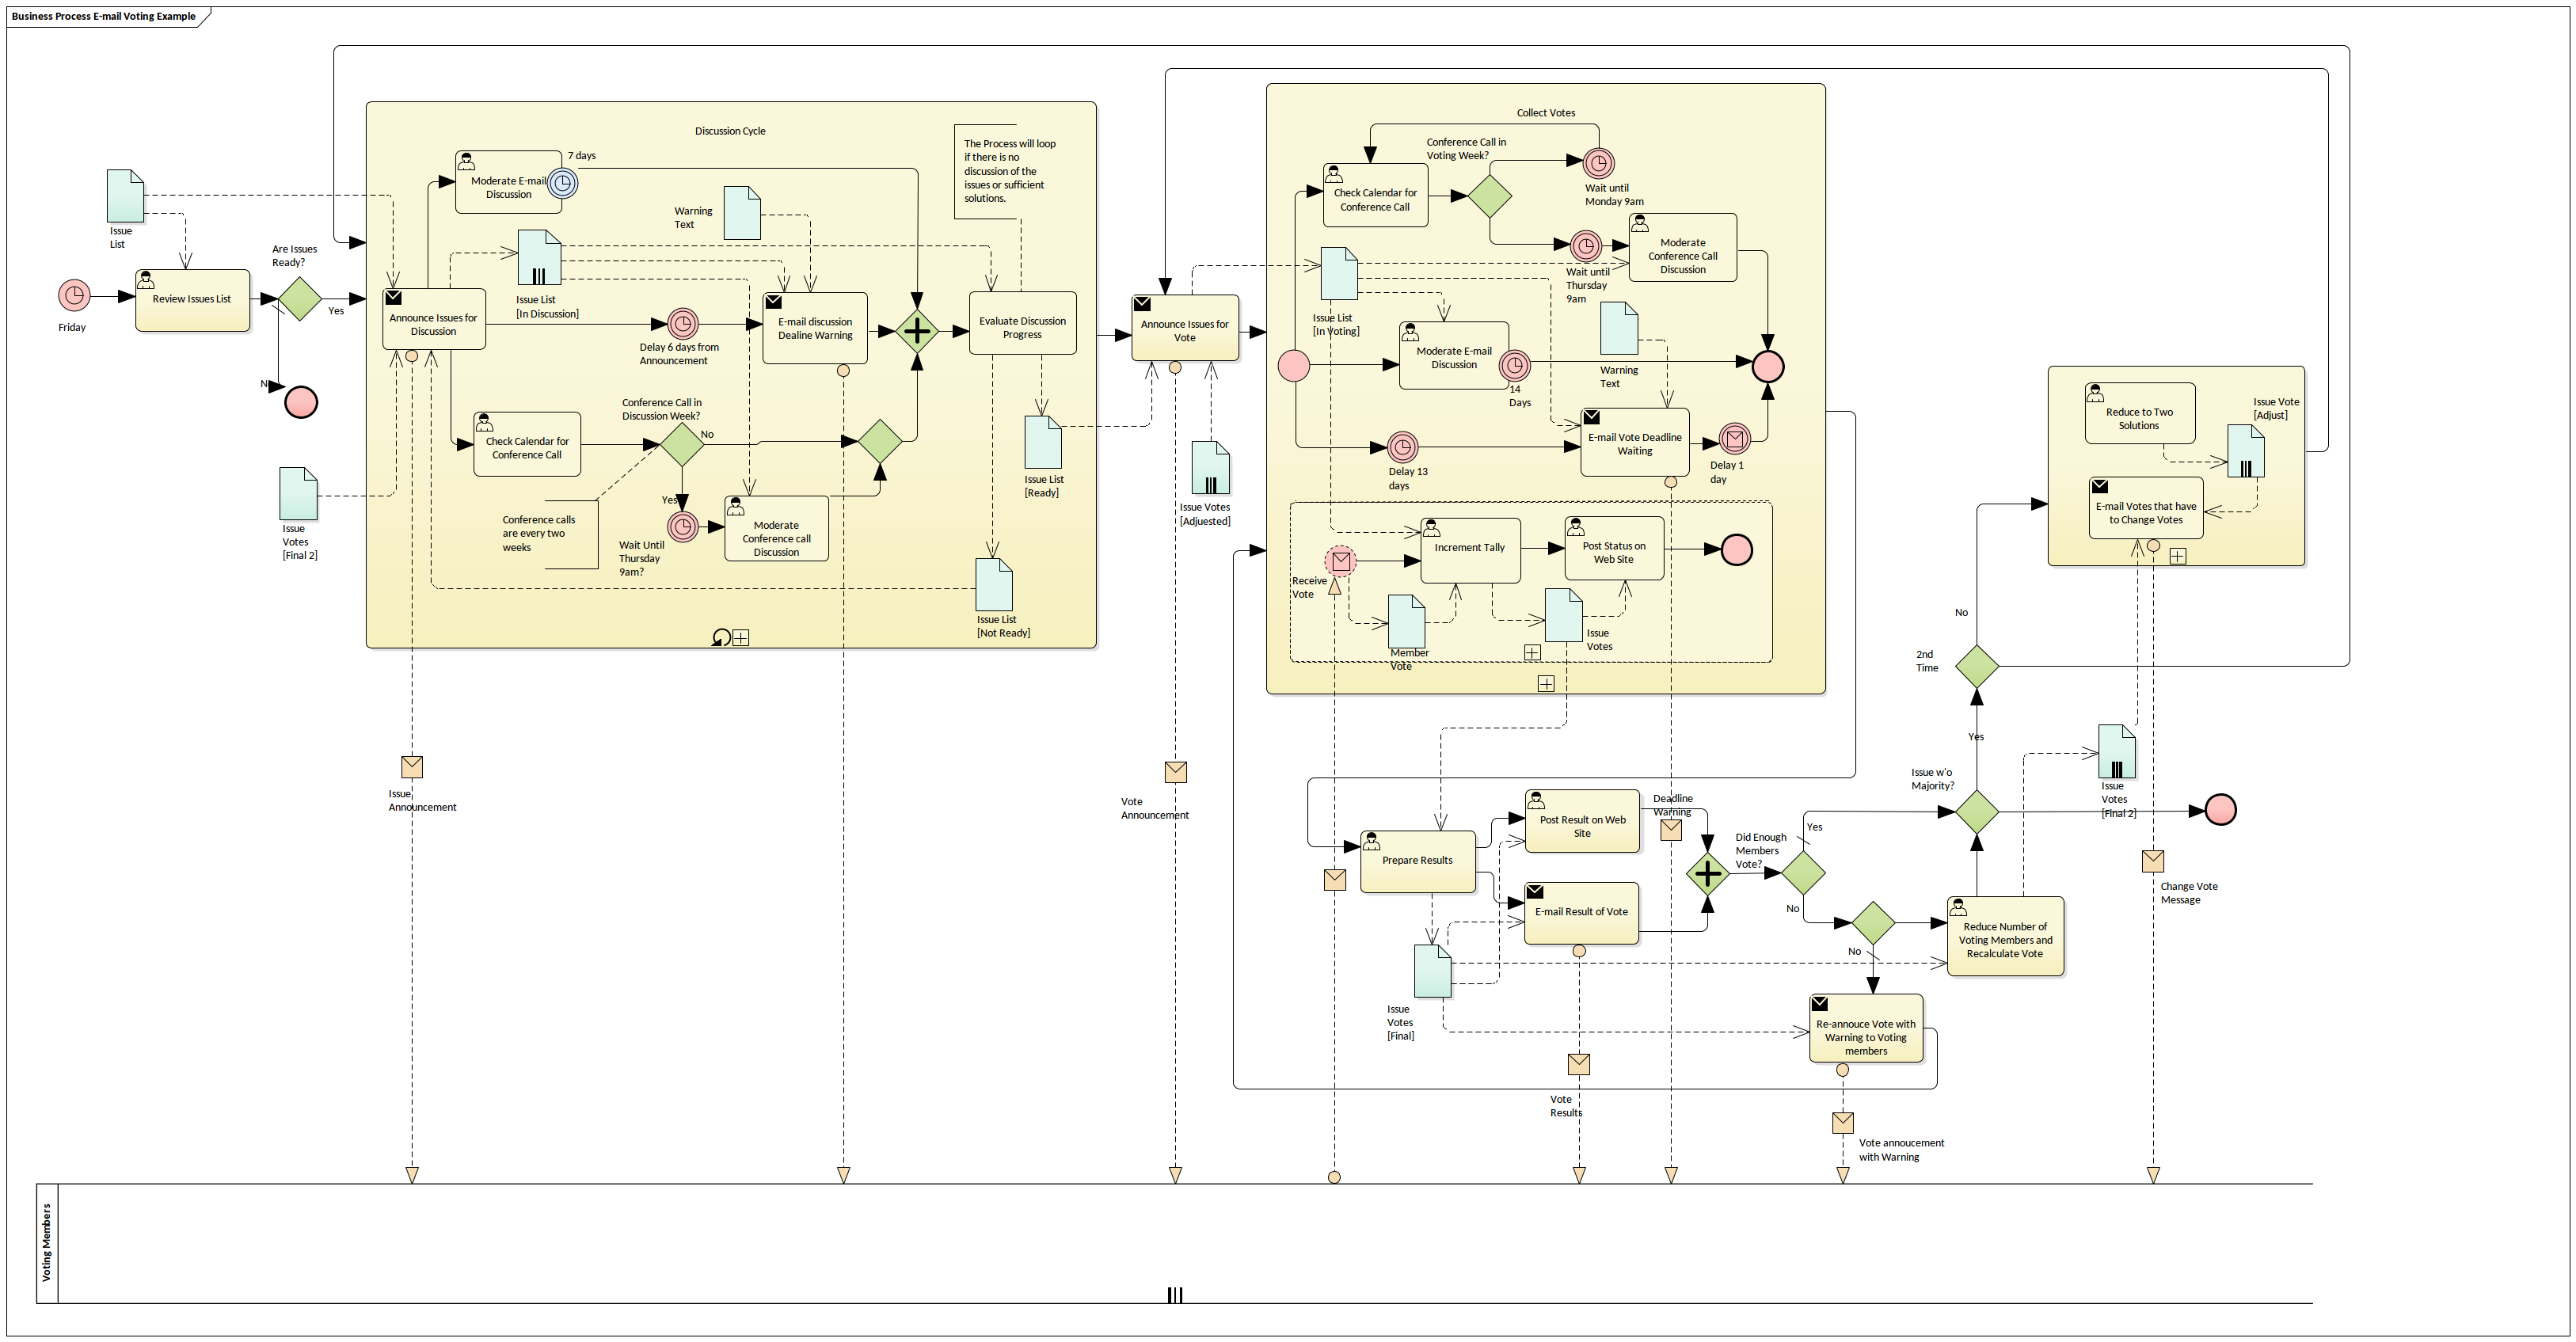 BPMN Business Process Diagram - Email Voting Example